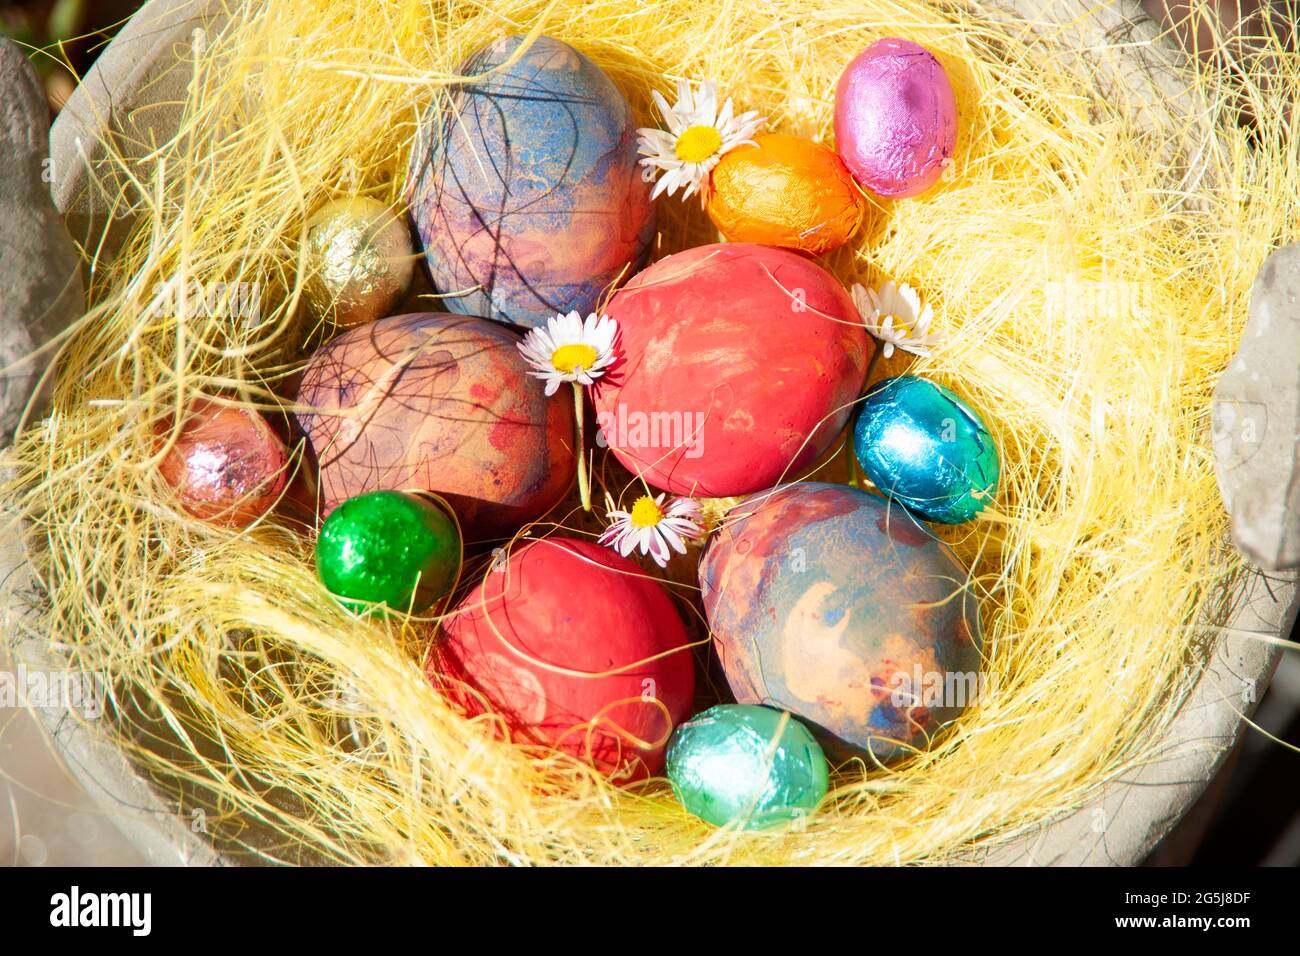 Italy, Turin, Overhead view of colorful chocolate Eater eggs Stock Photo